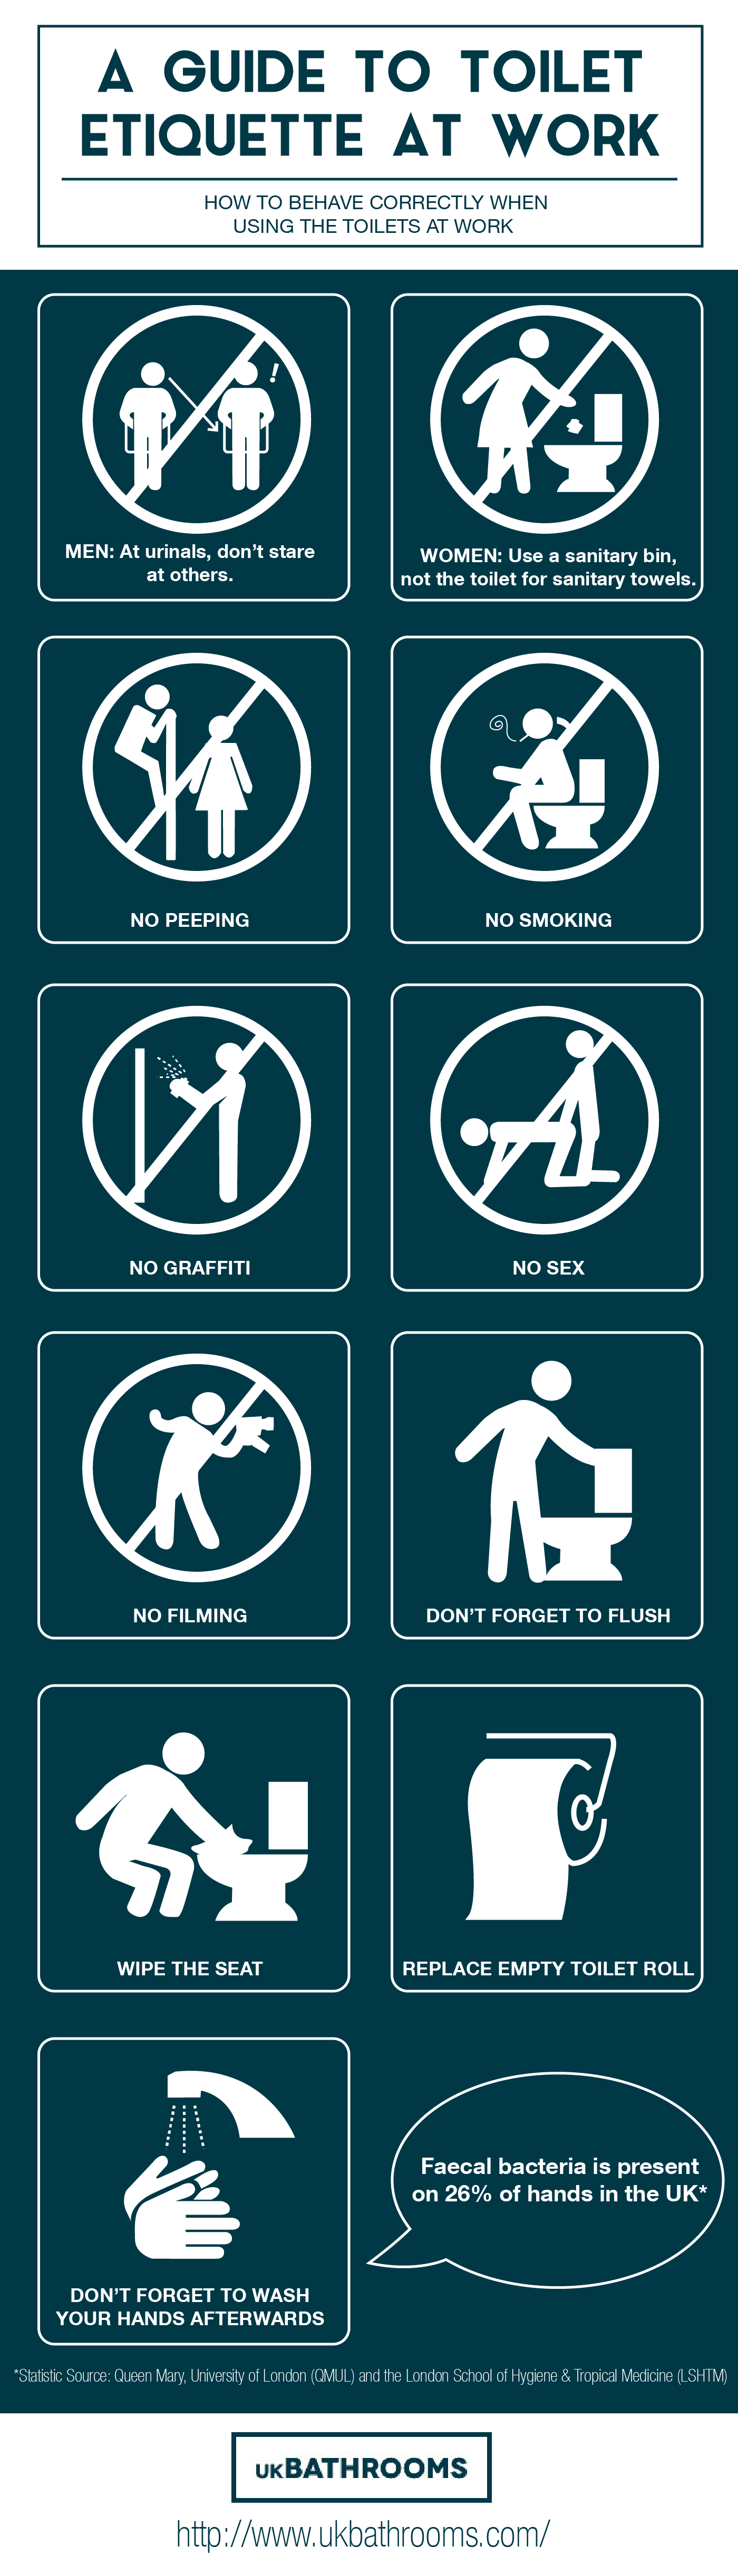 a-guide-to-toilet-etiquette-at-work-uk-bathrooms